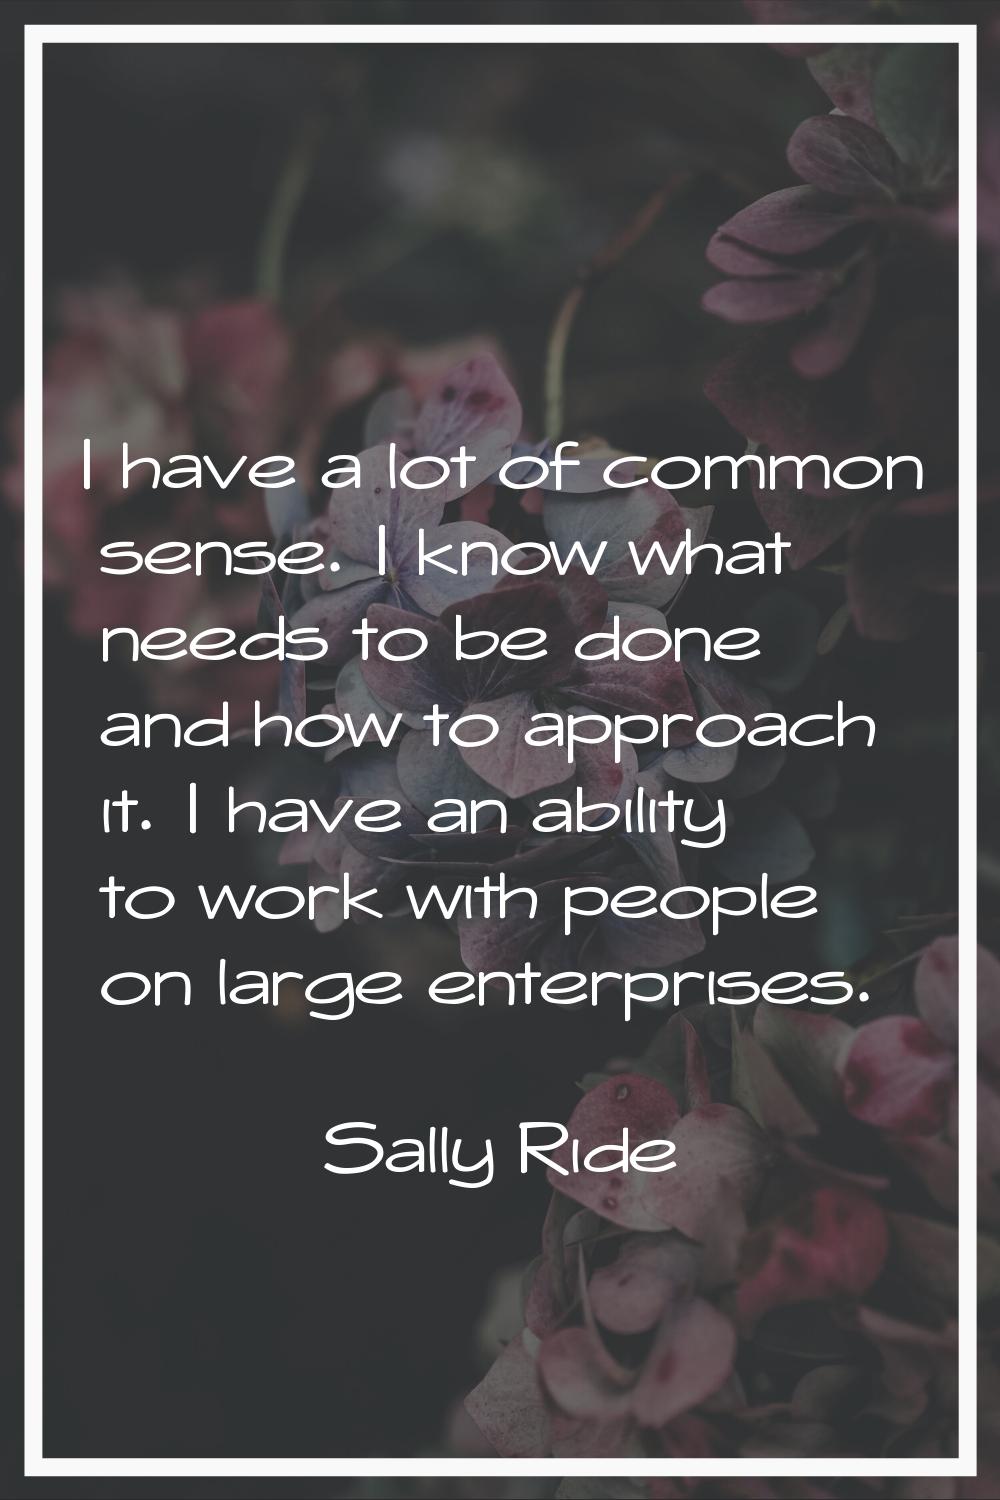 I have a lot of common sense. I know what needs to be done and how to approach it. I have an abilit